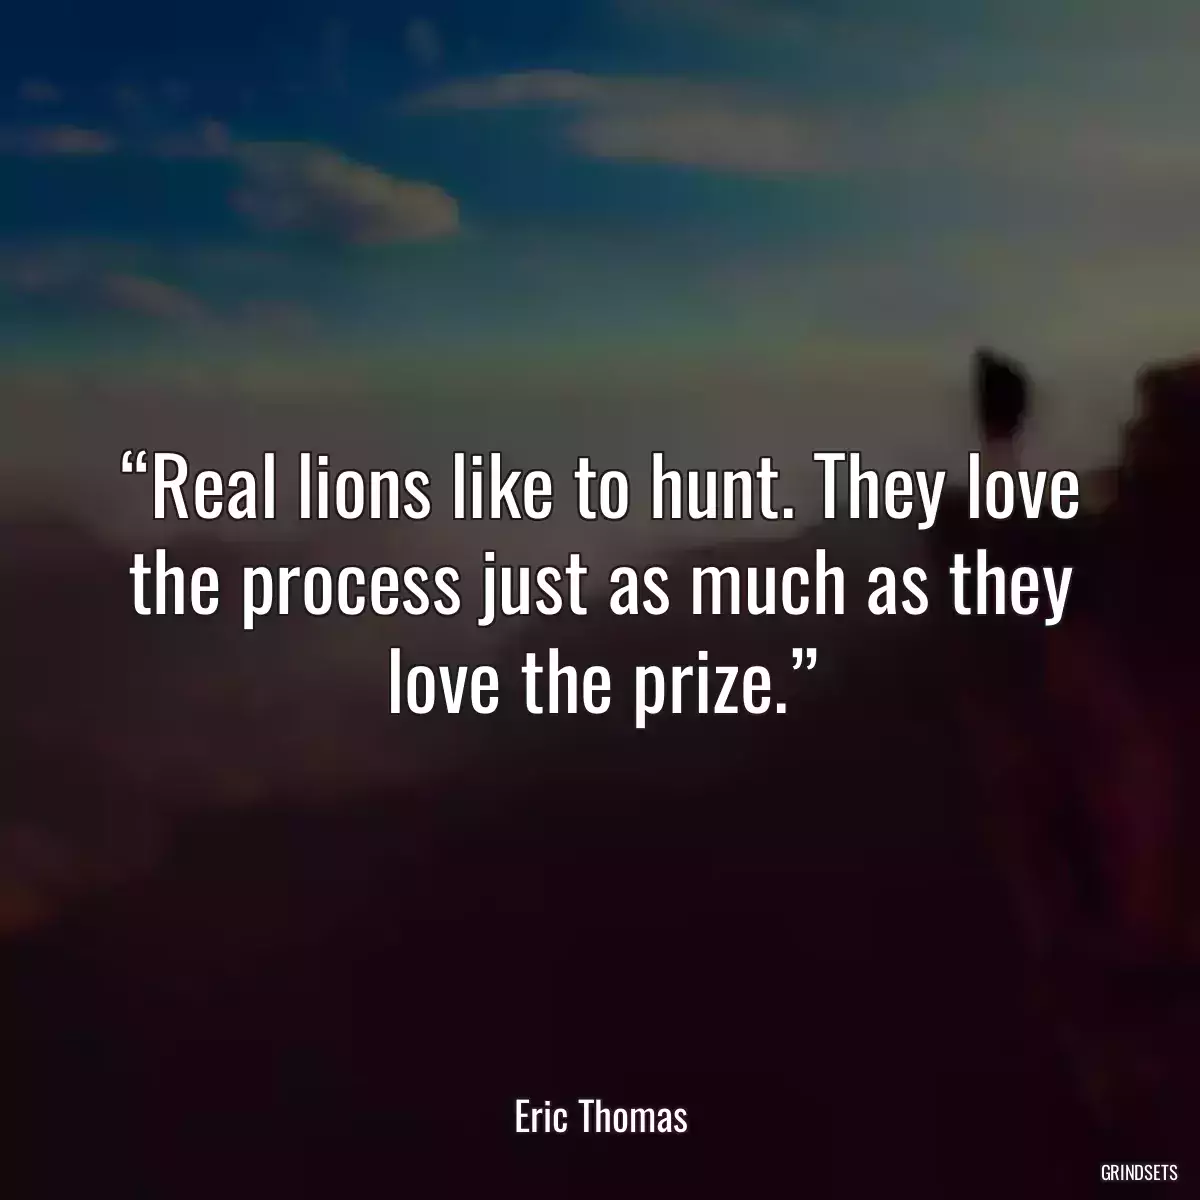 “Real lions like to hunt. They love the process just as much as they love the prize.”